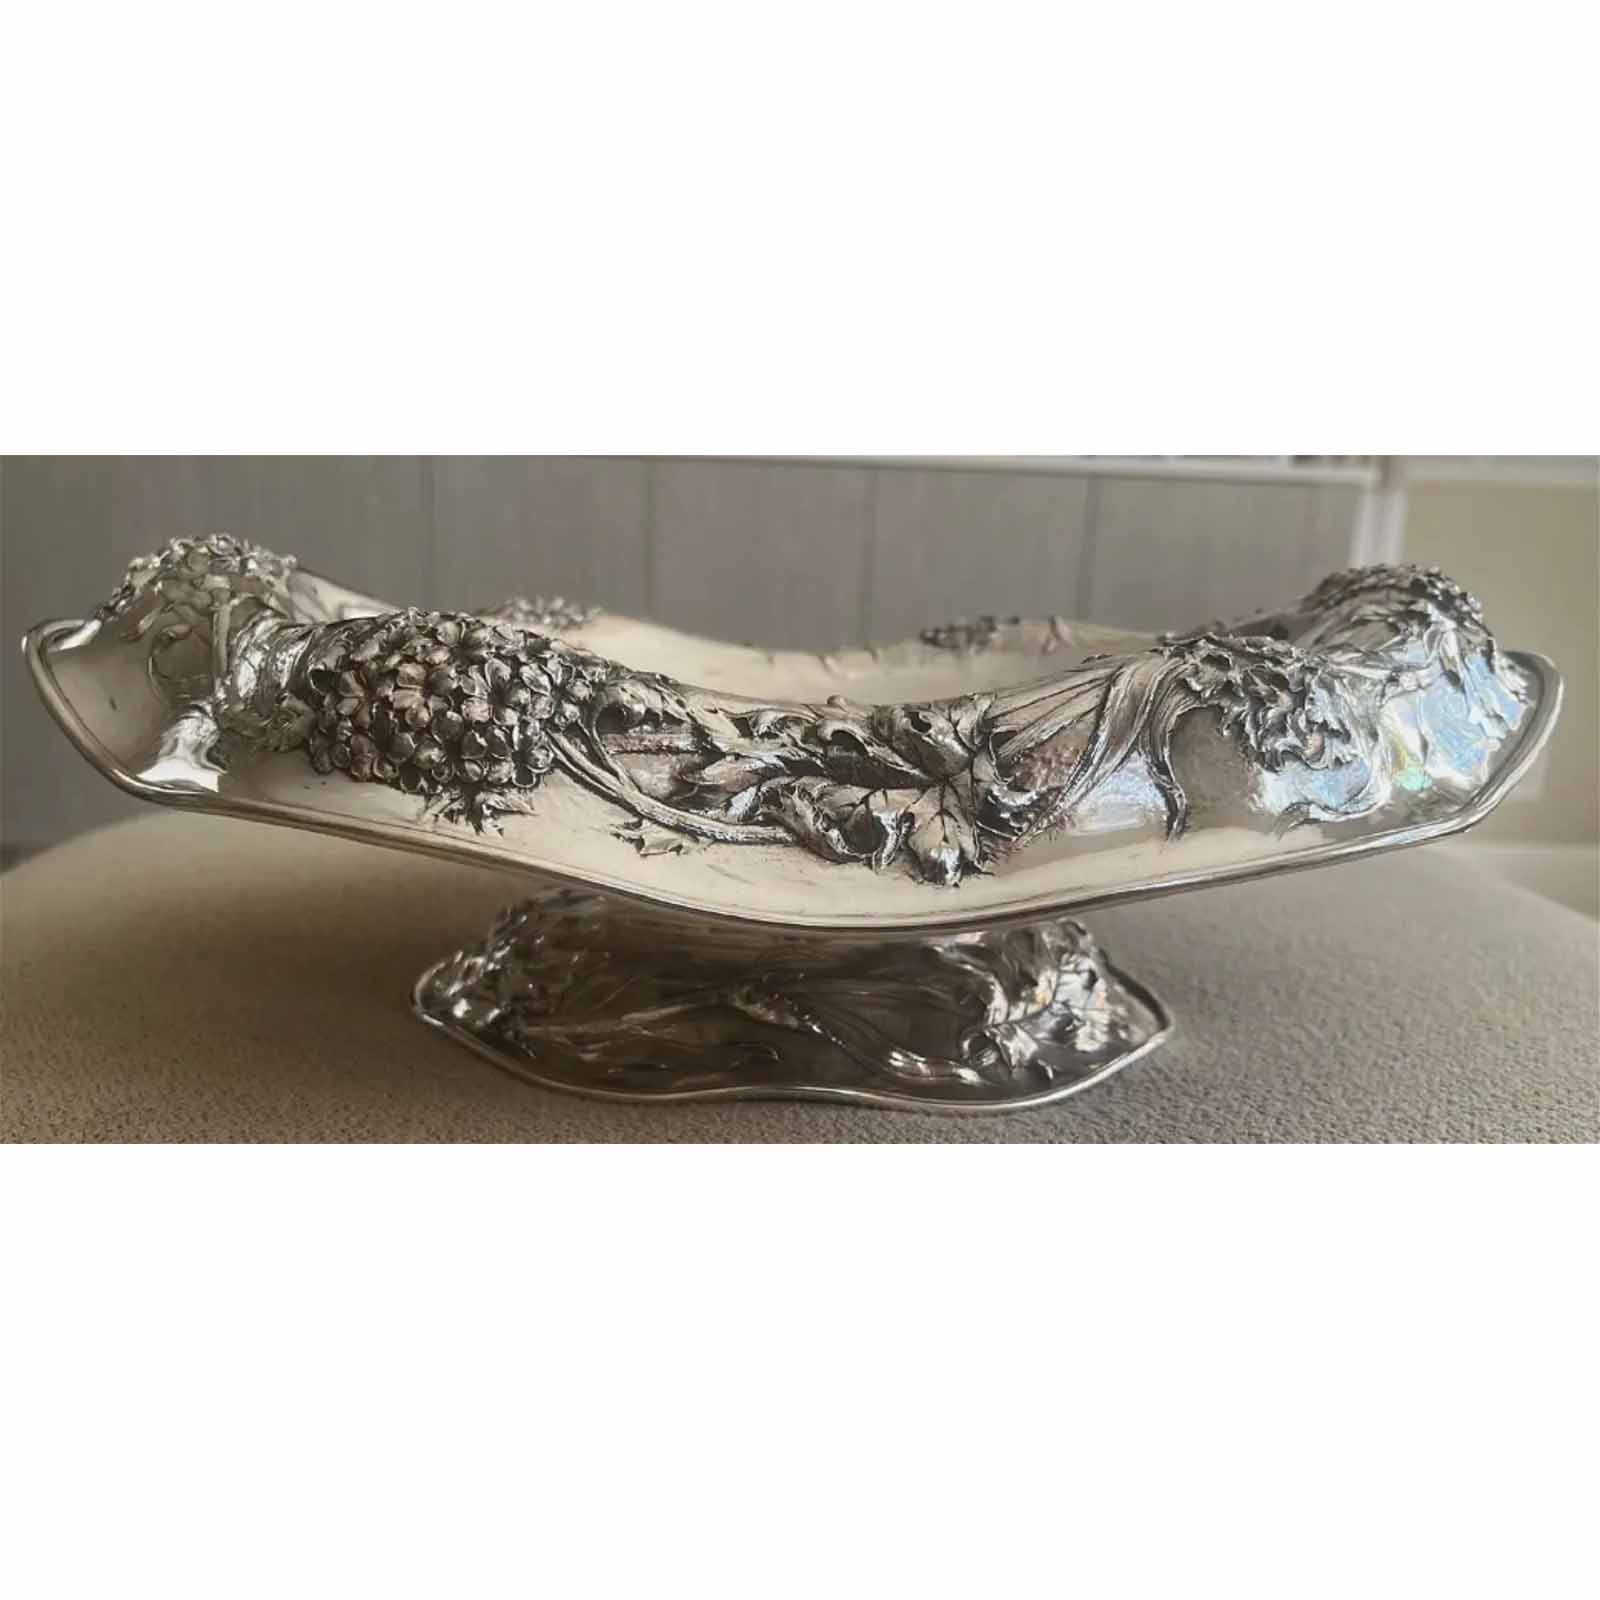 Dominick And Haff Sterling Silver Art Nouveau Centerpiece, estimated at $1,500-$2,000 at SJ Auctioneers.